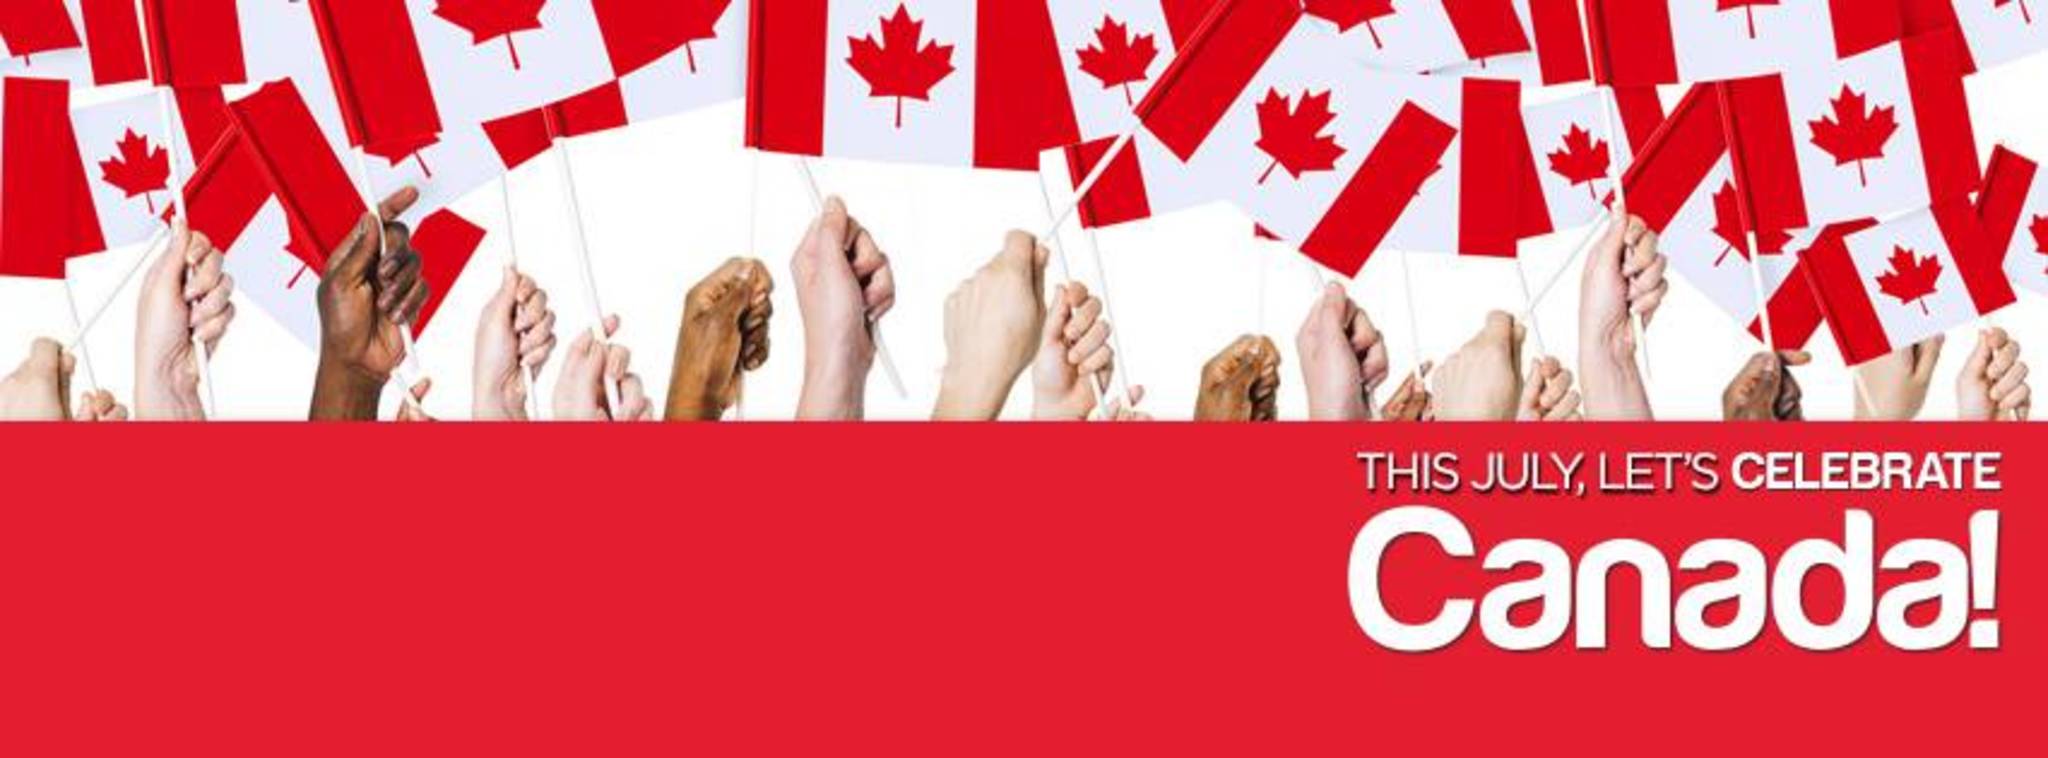 This july, let’s celebrate Canada Day